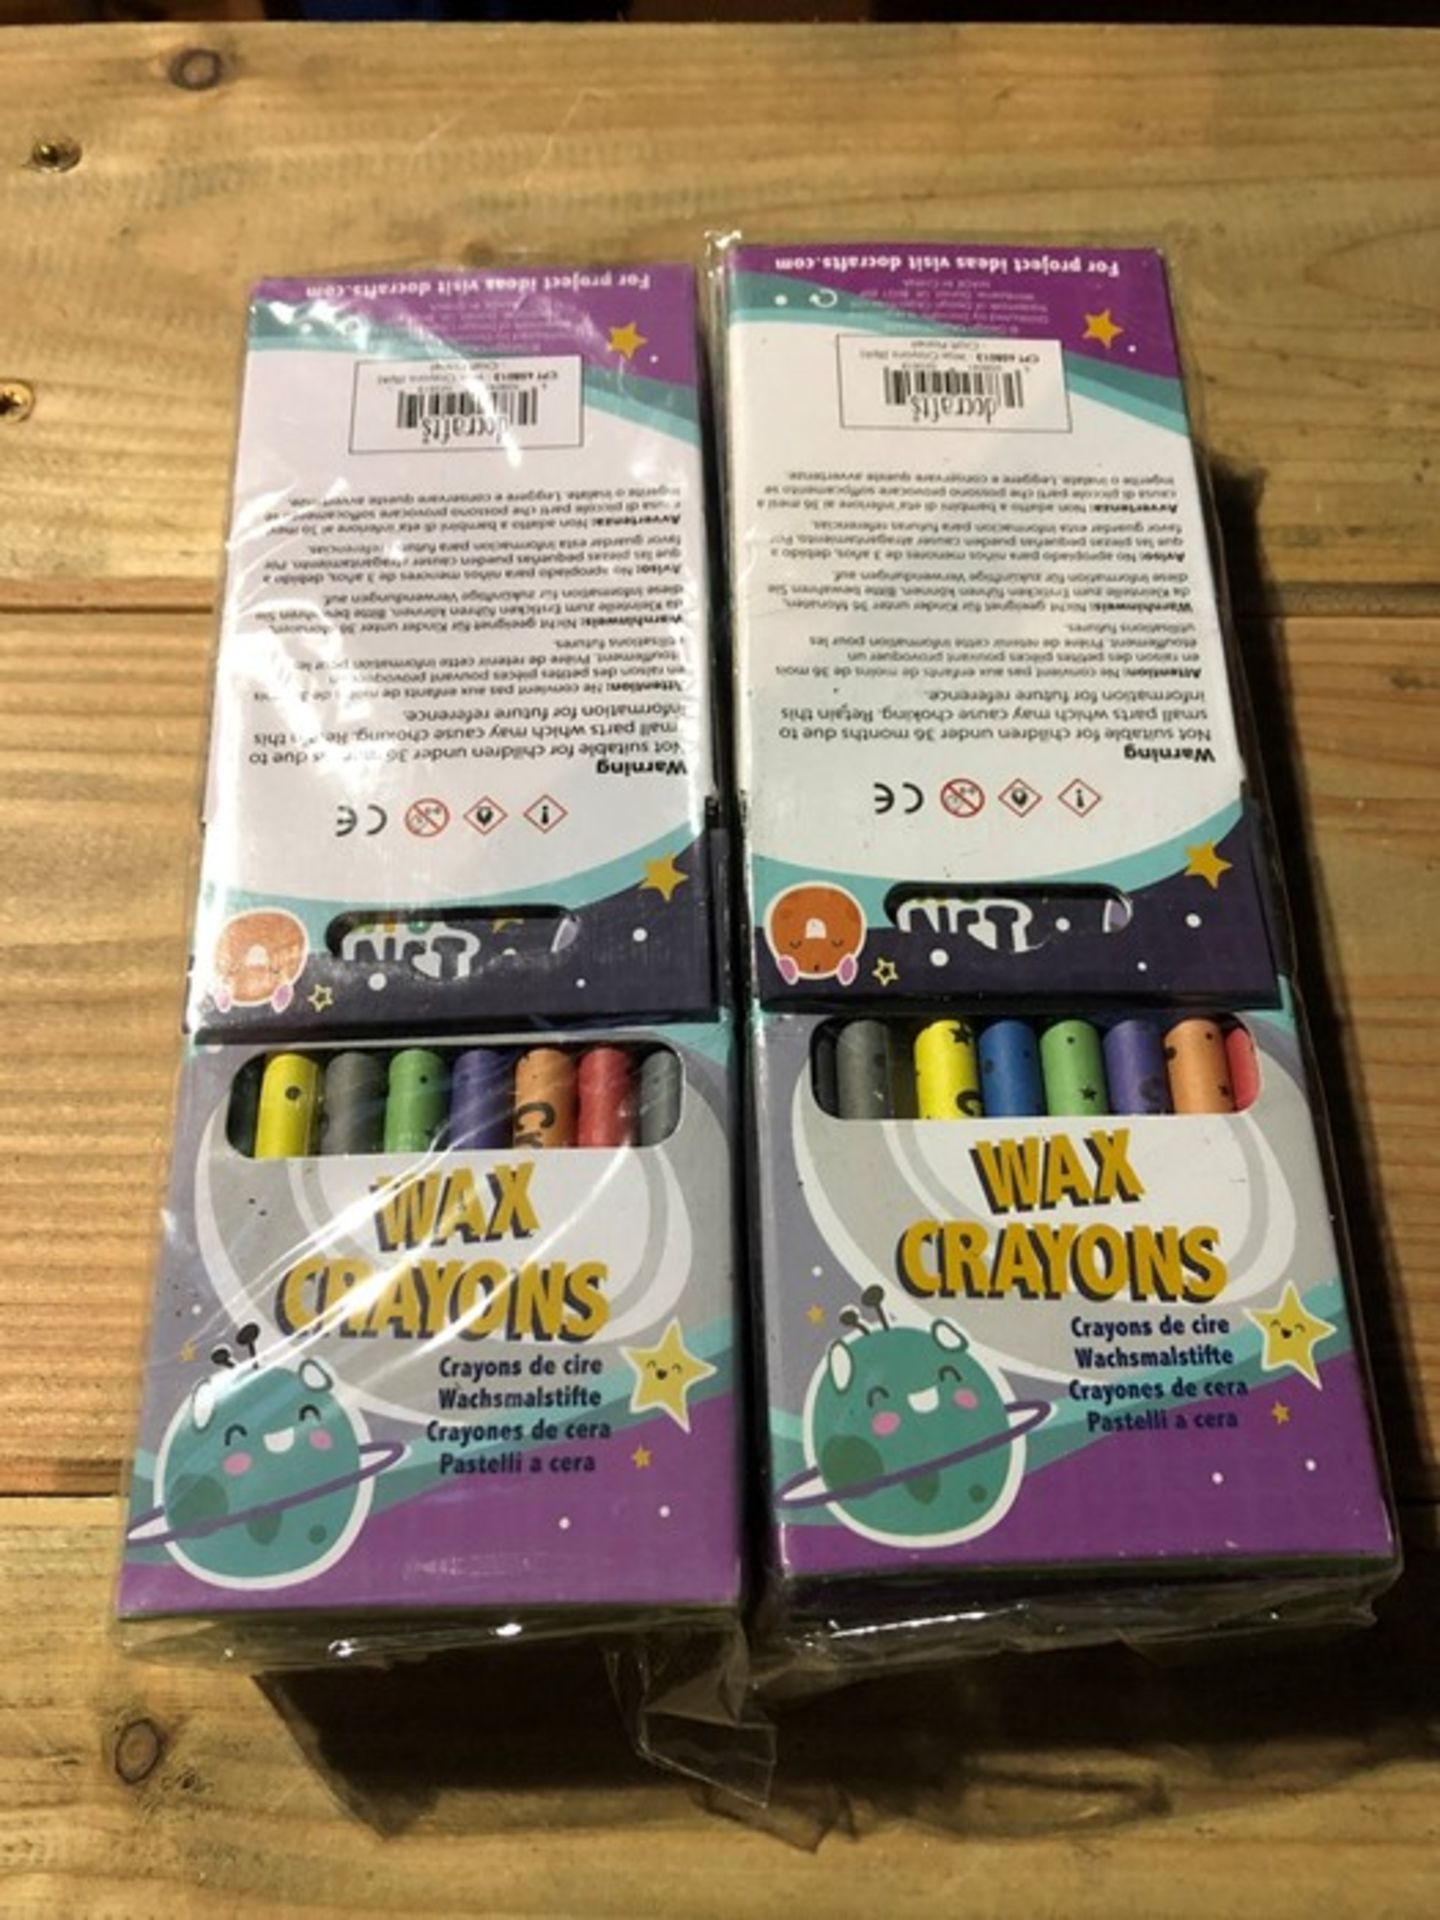 1 LOT TO CONTAIN 2 SETS OF WAX CRAYONS - 1 SET HAS 6 PACKS OF CRAYONS, 12 TOTAL (PUBLIC VIEWING